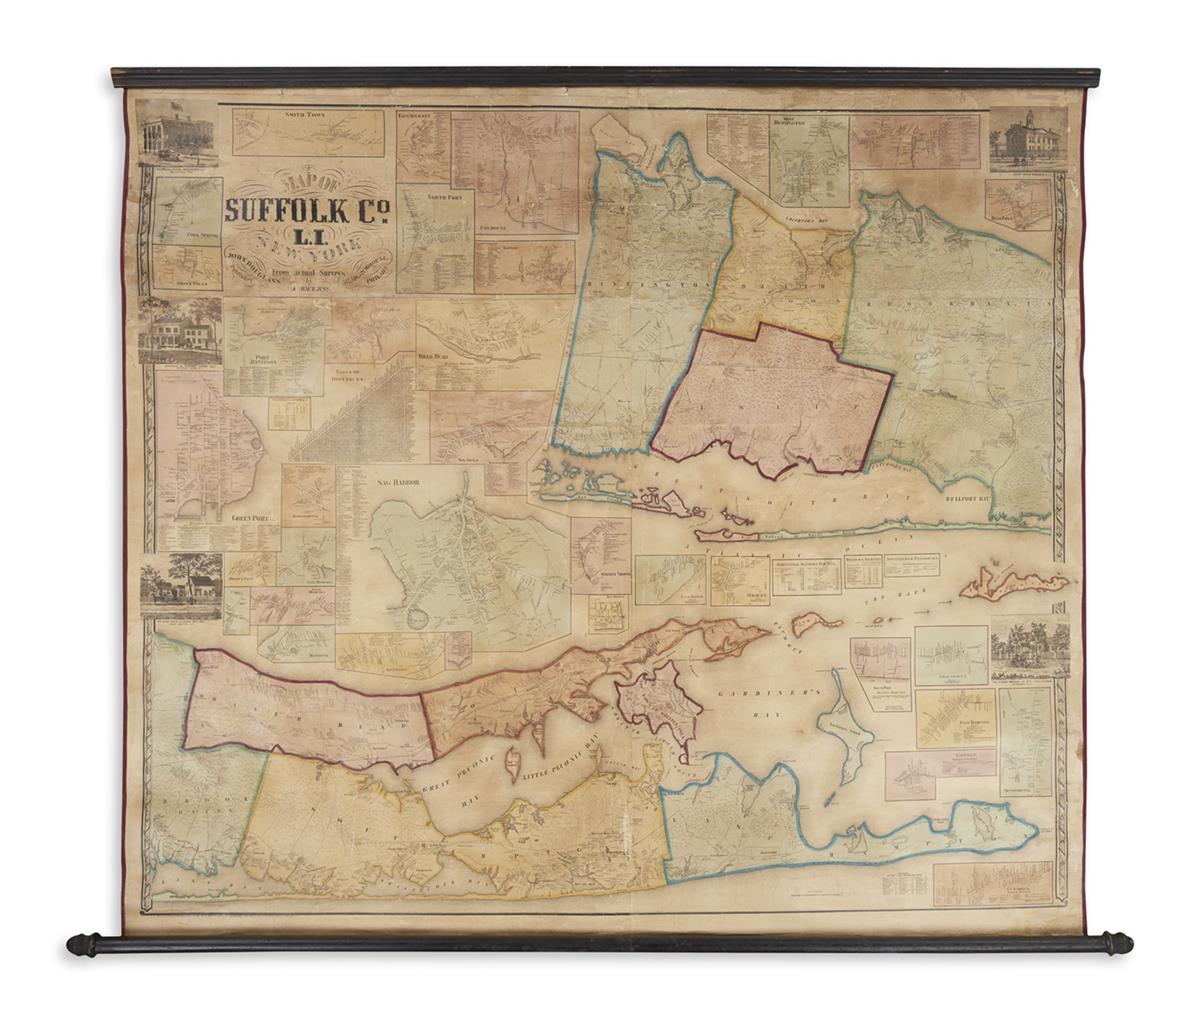 (NEW YORK -- LONG ISLAND.) Chace, J.; and Smith, Robert Pearsall. Map of Suffolk Co., L.I. New York.